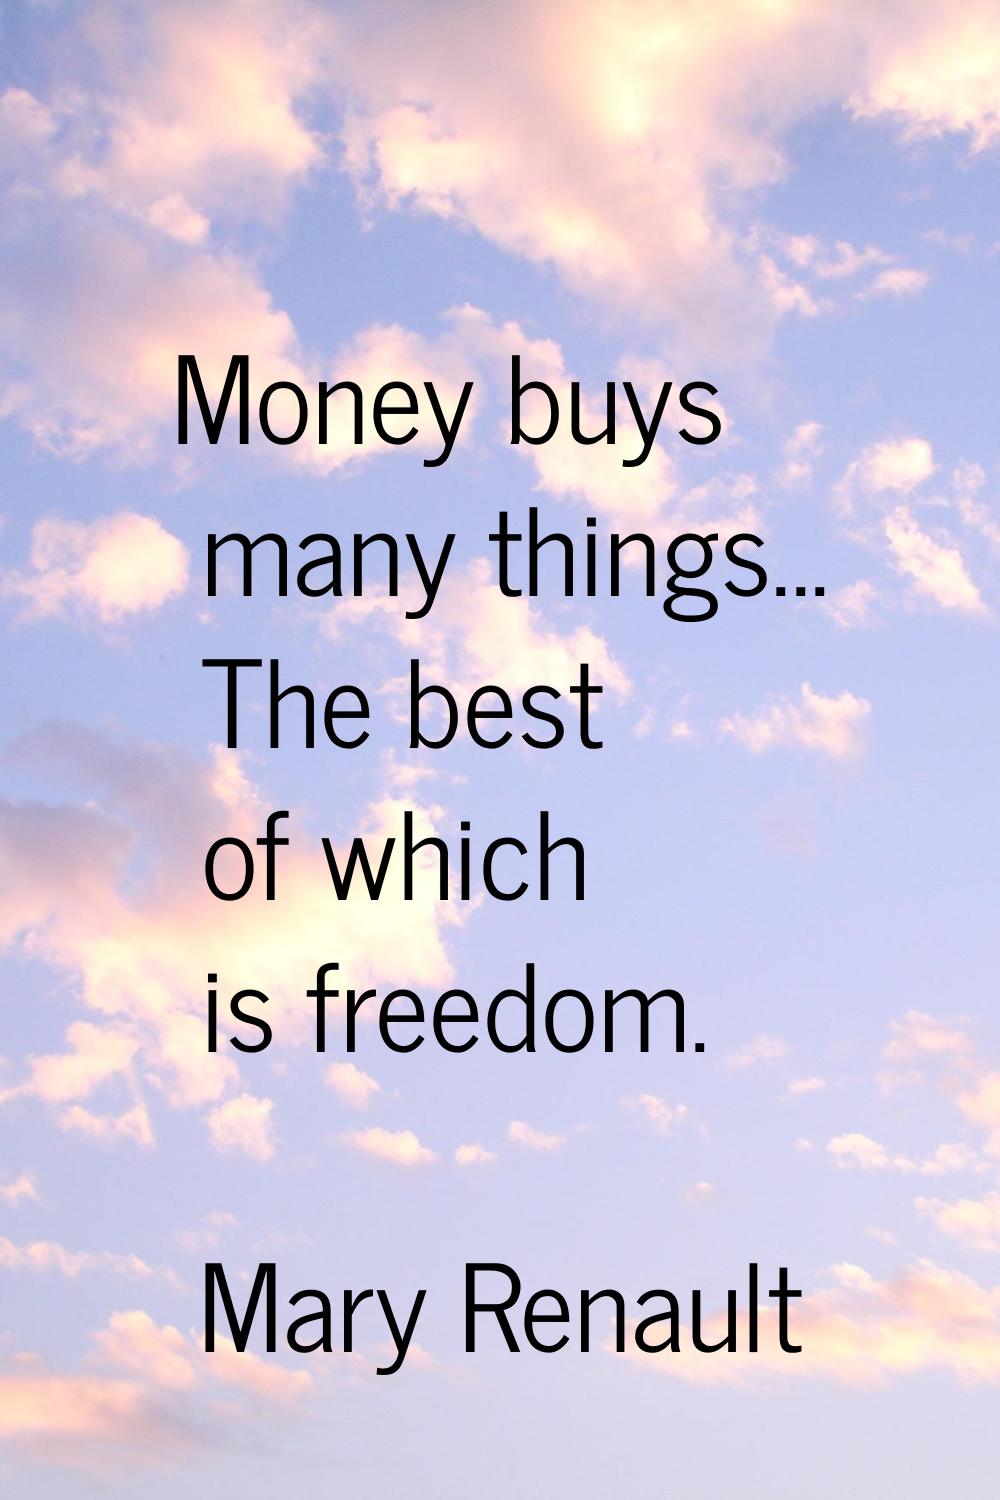 Money buys many things... The best of which is freedom.